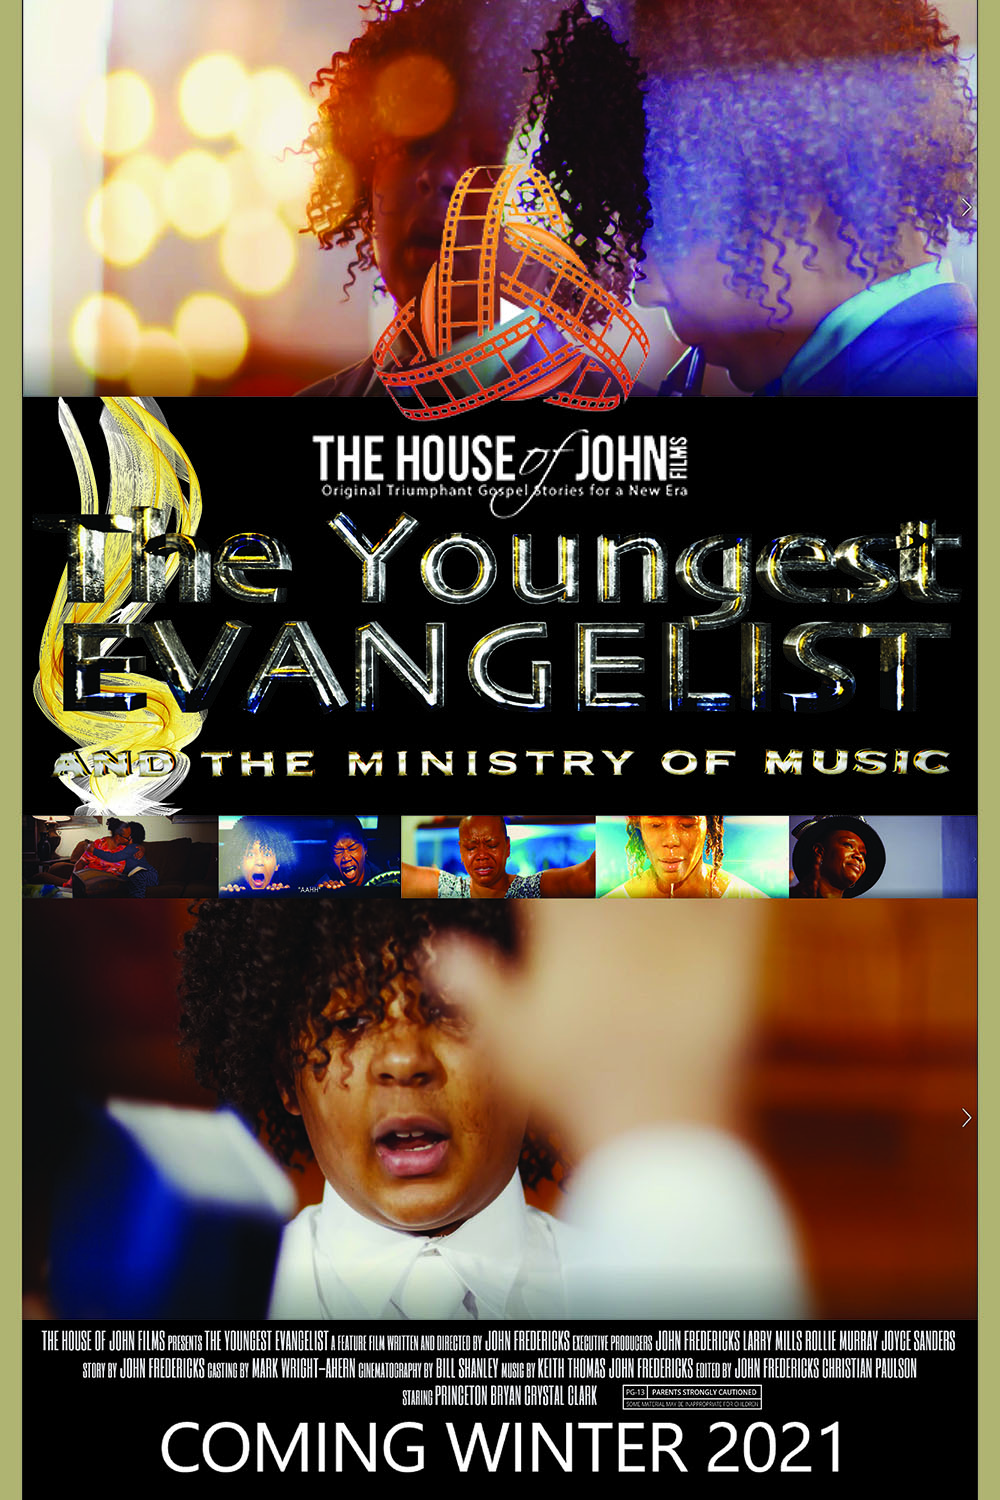 The Youngest Evangelist and the Ministry of Music